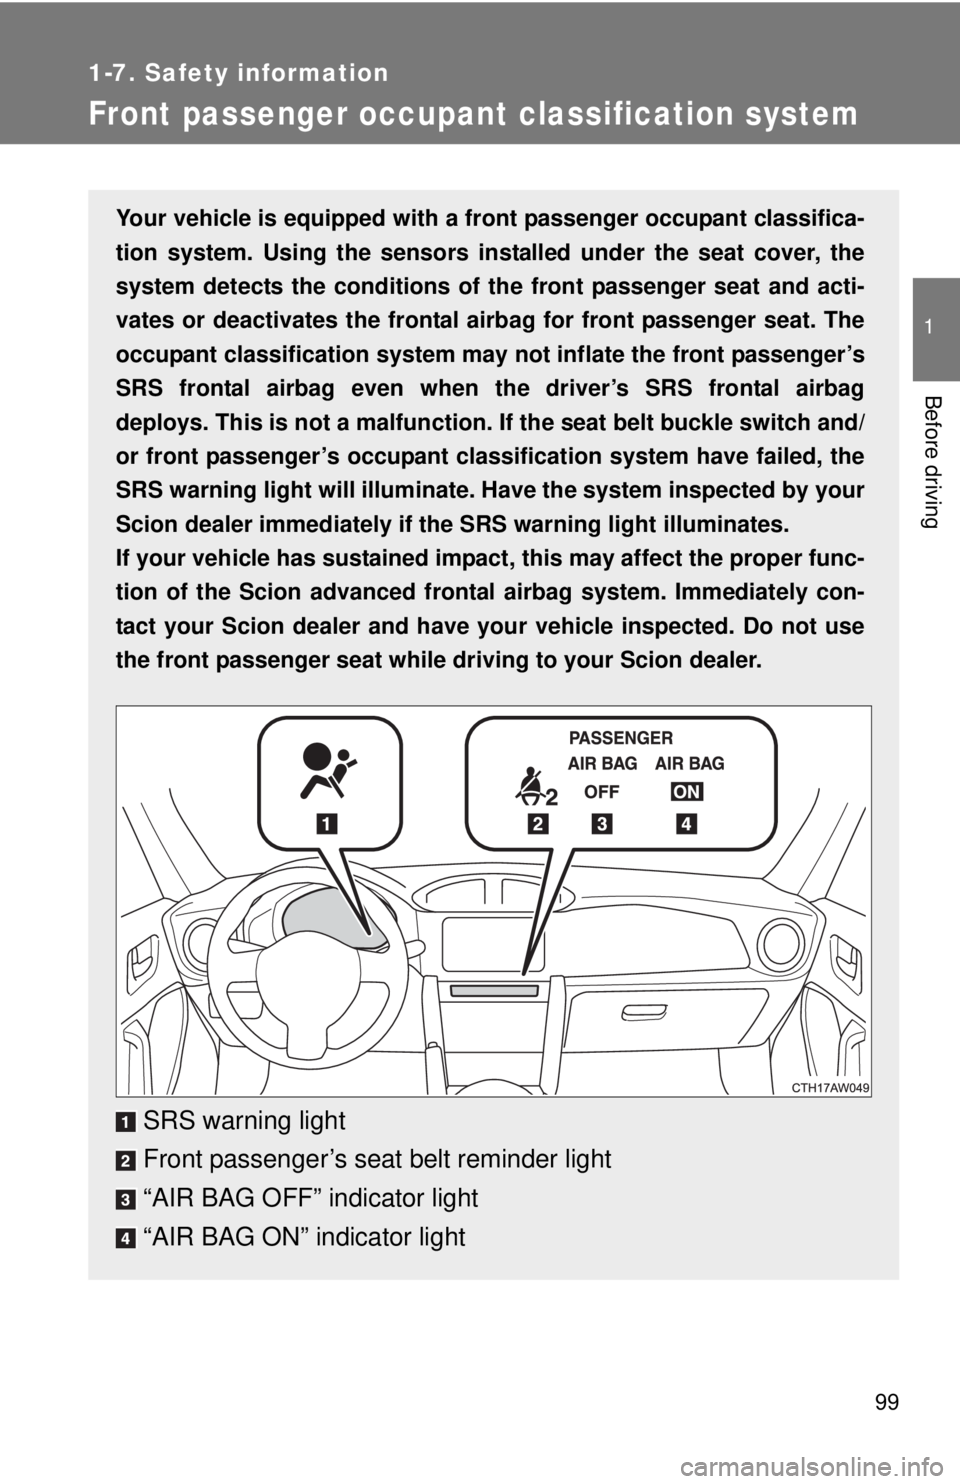 TOYOTA FR-S 2014  Owners Manual (in English) 99
1
1-7. Safety information
Before driving
Front passenger occupant classification system
Your vehicle is equipped with a front passenger occupant classifica-
tion system. Using the sensors installed